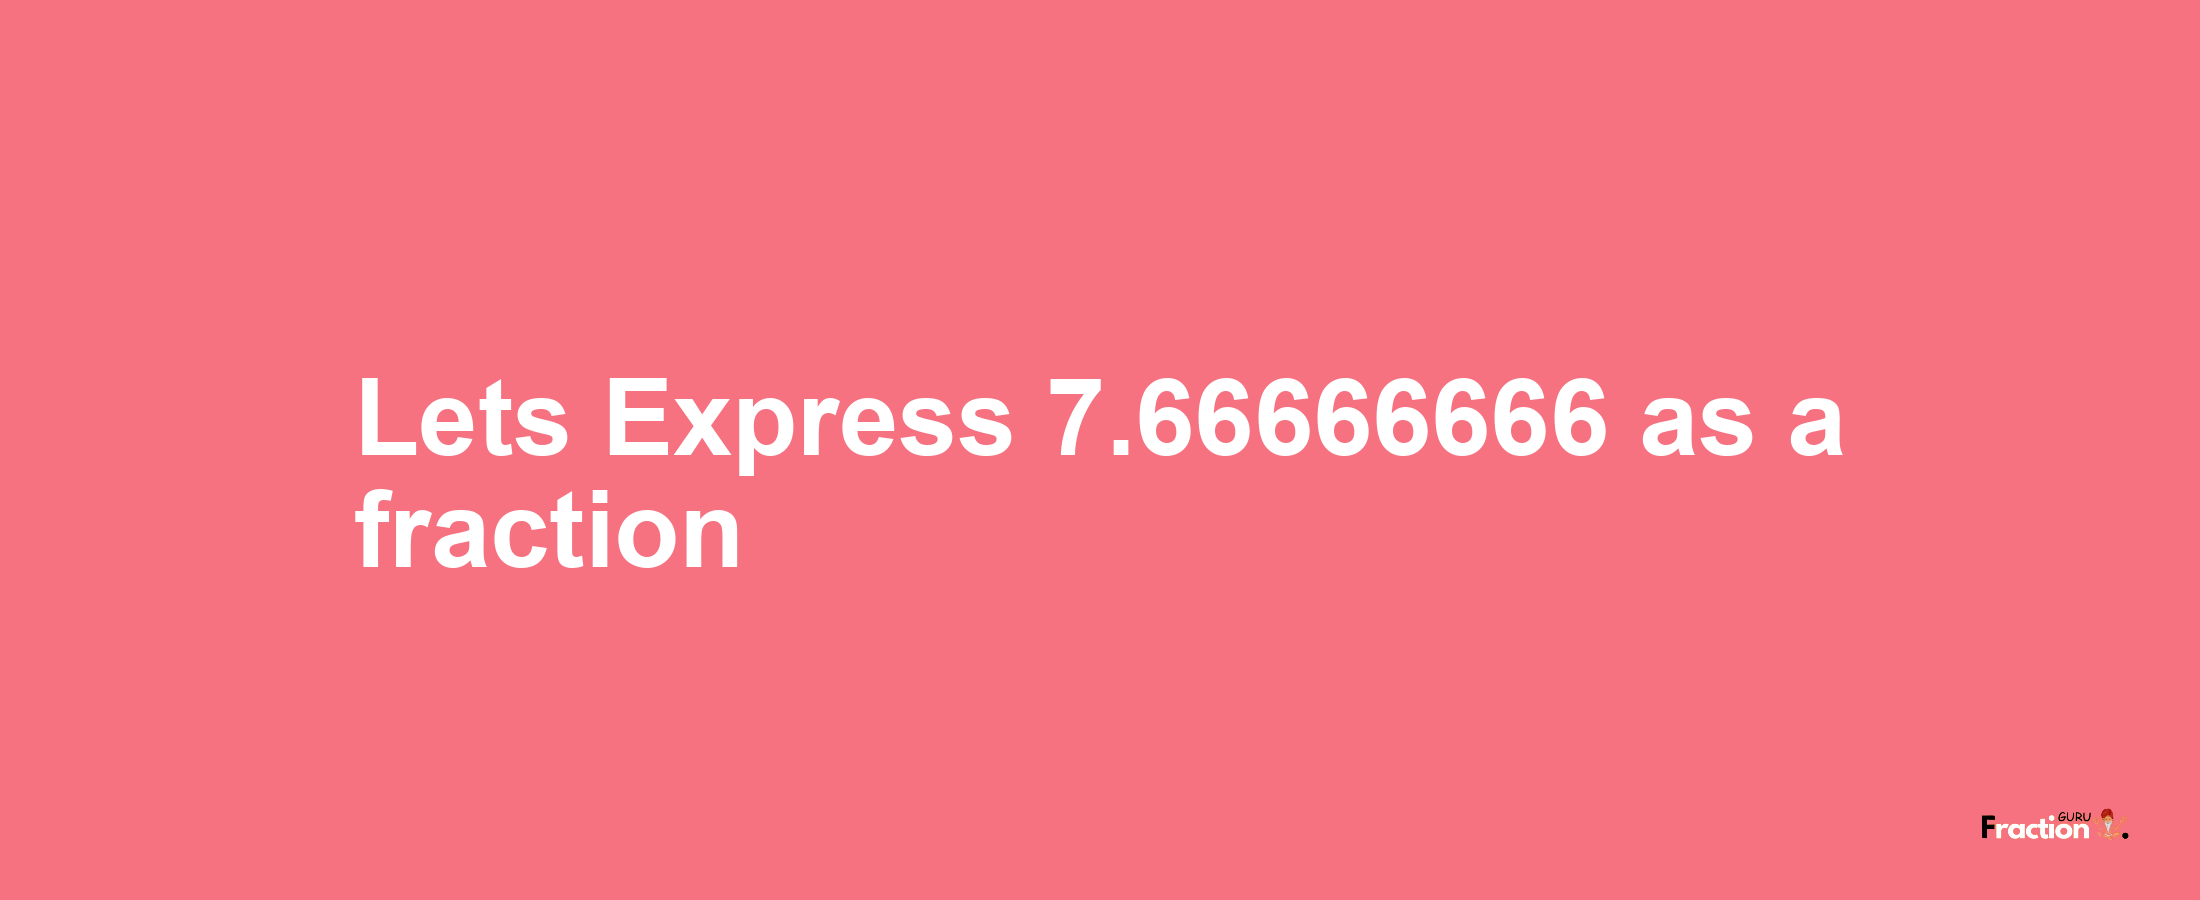 Lets Express 7.66666666 as afraction